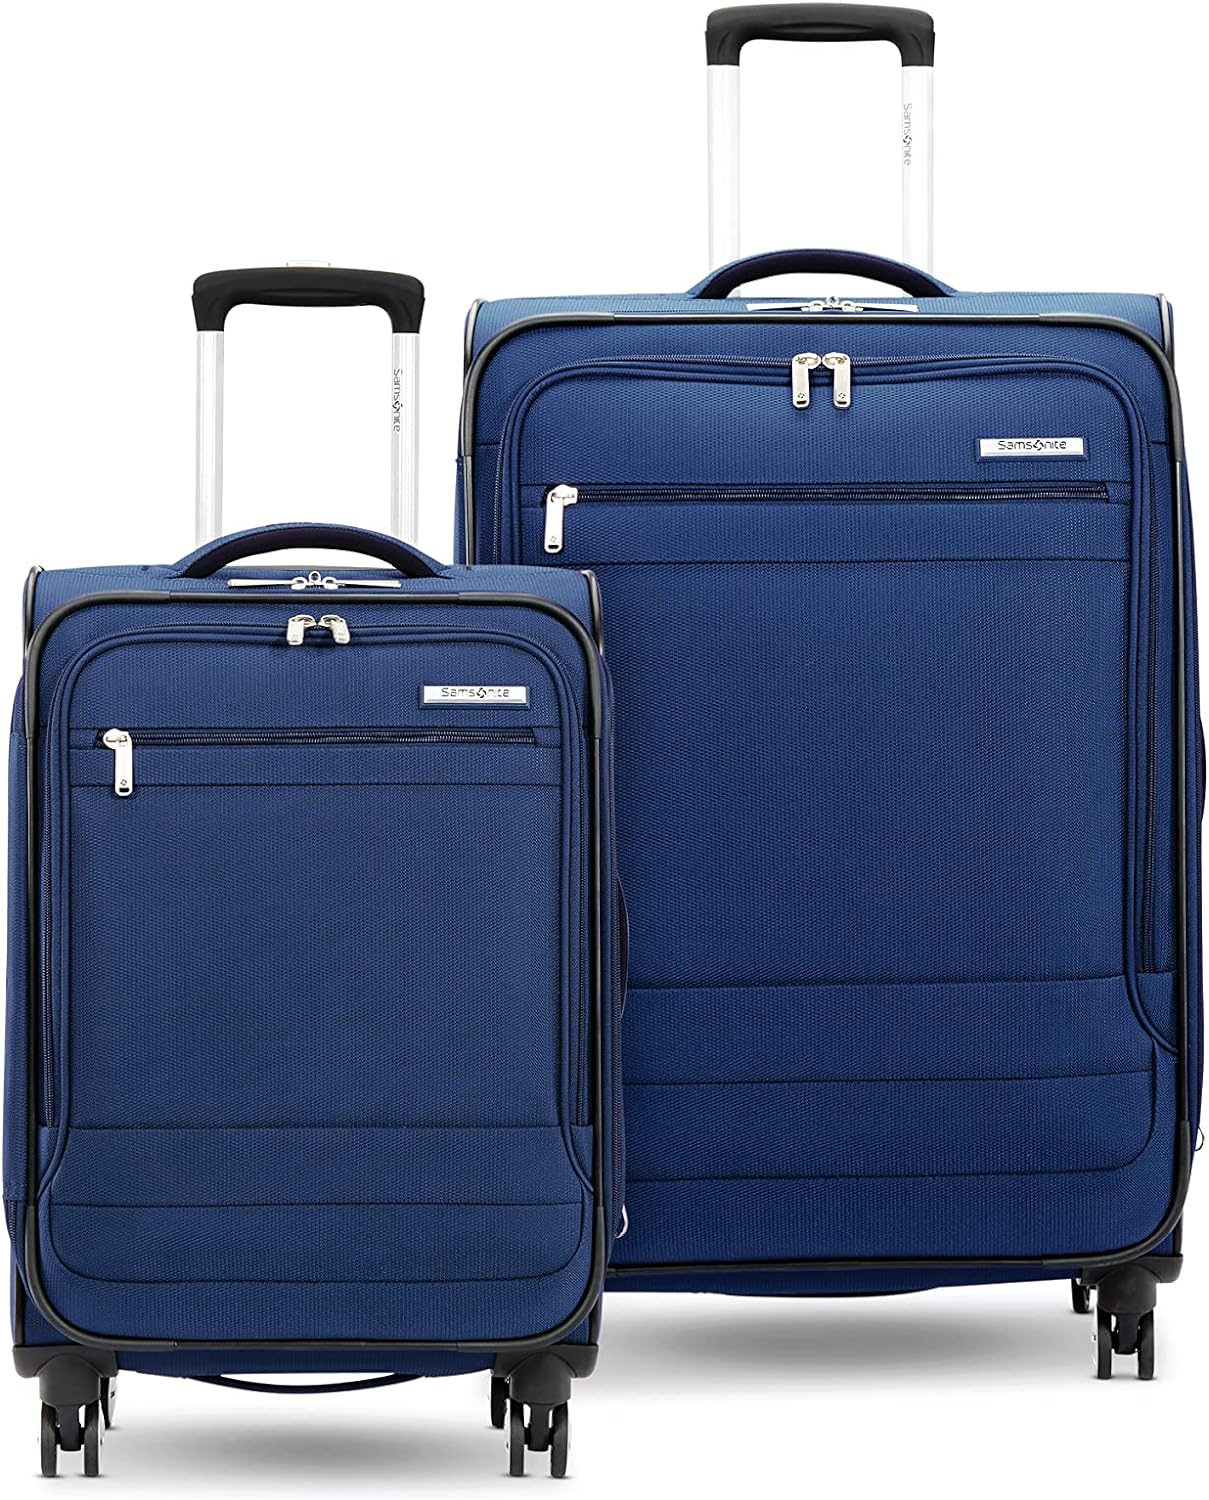 The Best Softside Carry-On Luggage for Effortless Travel